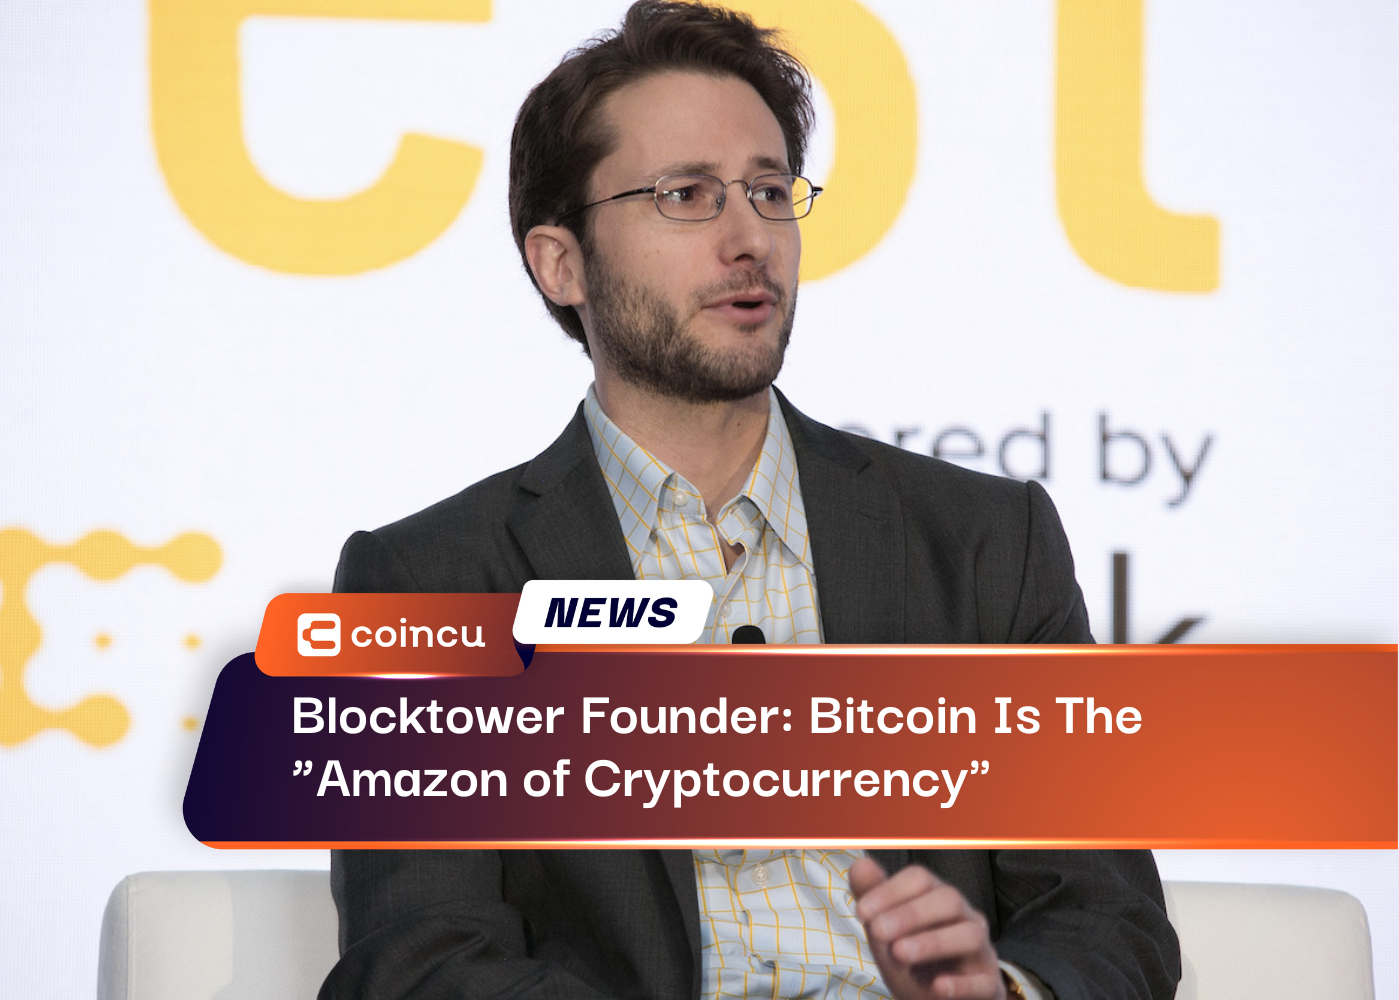 Blocktower Founder: Bitcoin Is The “Amazon of Cryptocurrency”